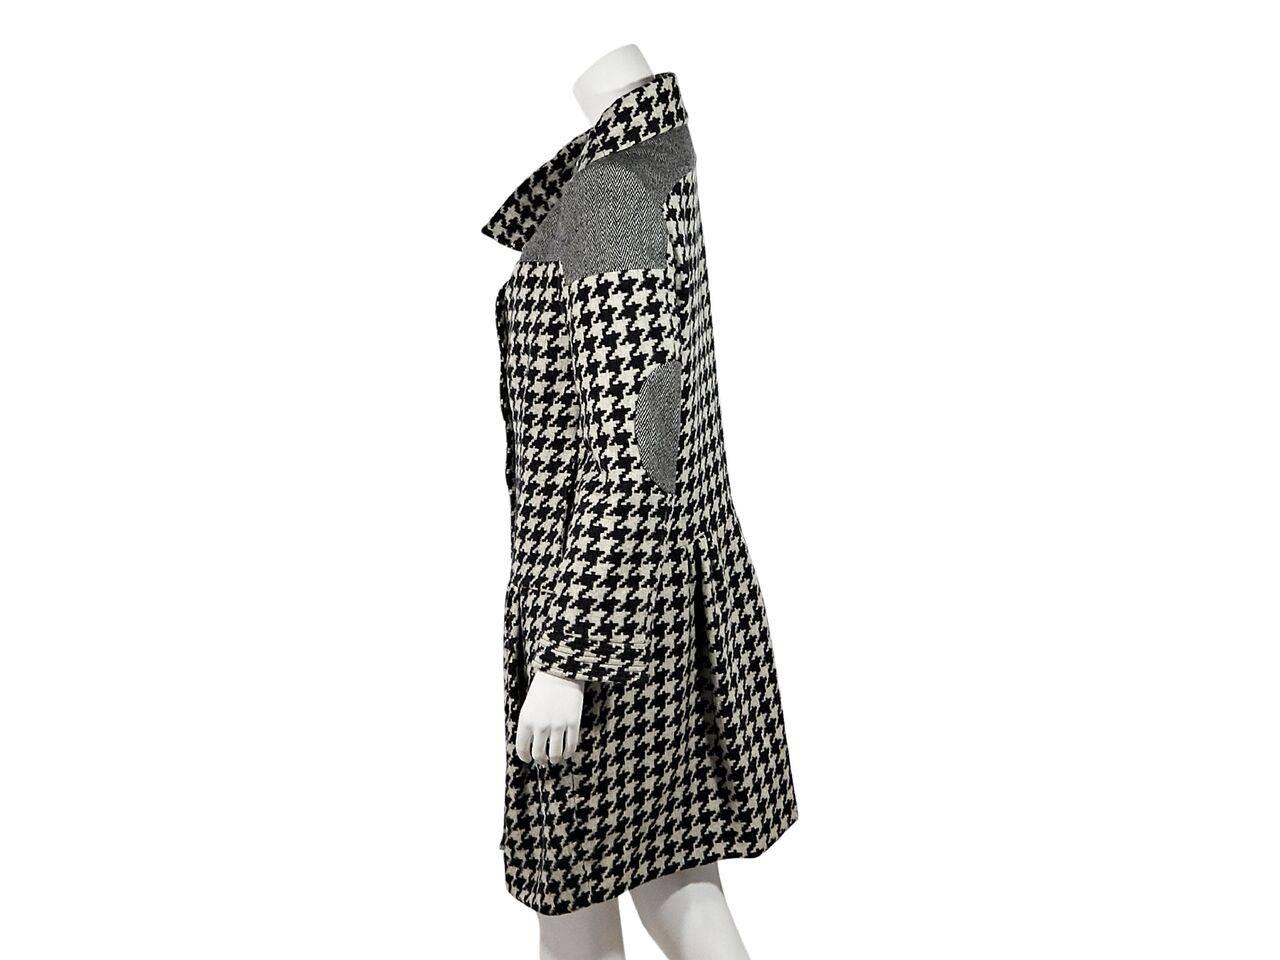 Product details:  Black and white houndstooth coat by Stella McCartney.  Shawl collar.  Long sleeves with elbow patches.  Button-front closure.  Label size IT 44. 
Condition: Pre-owned. Very good.
Est. Retail $ 2,525.00